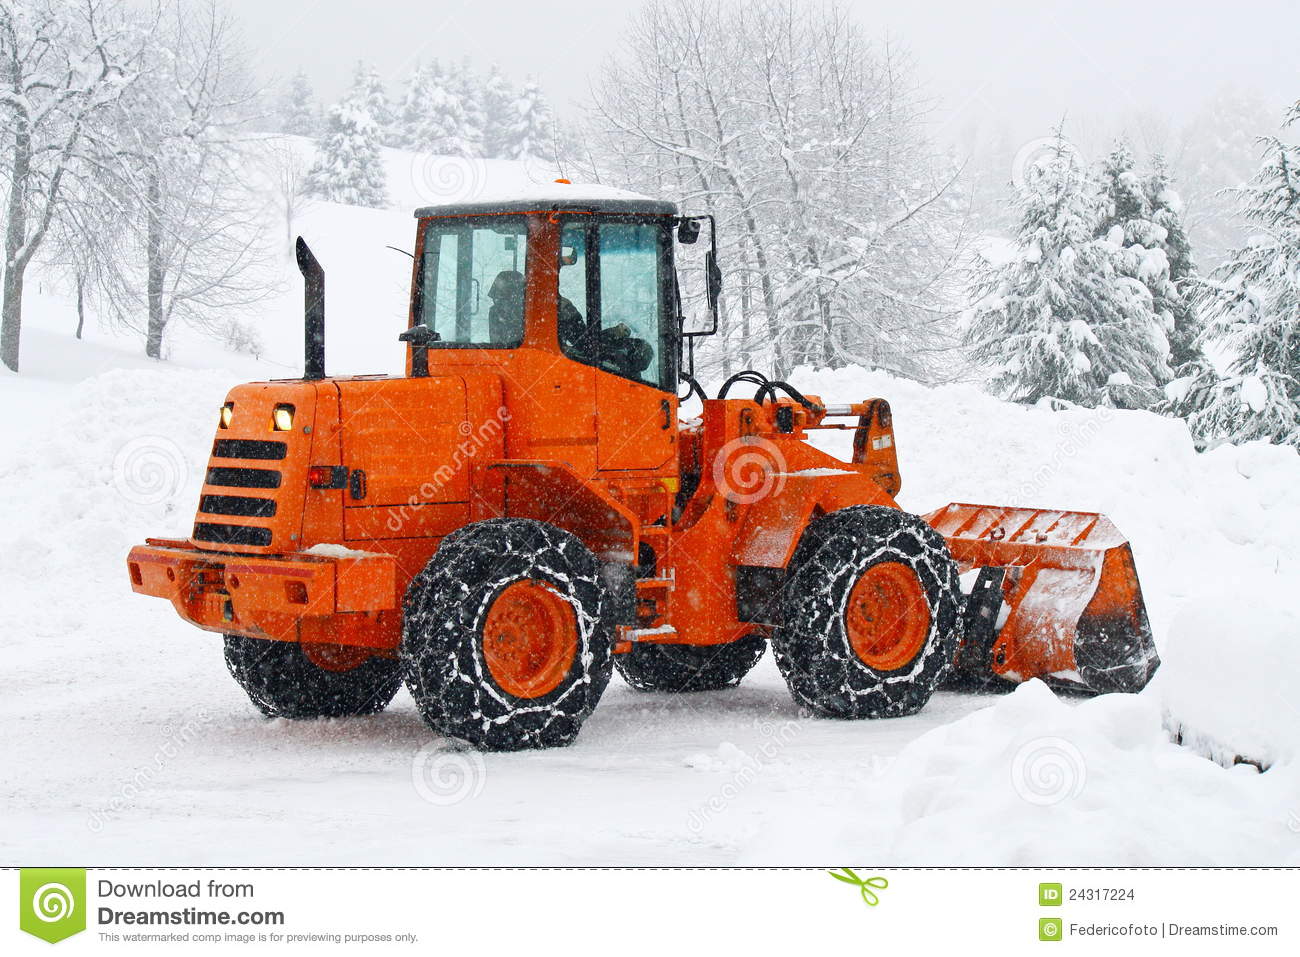 Snow Plows To Work Clearing The Snow From The Road Stock Images